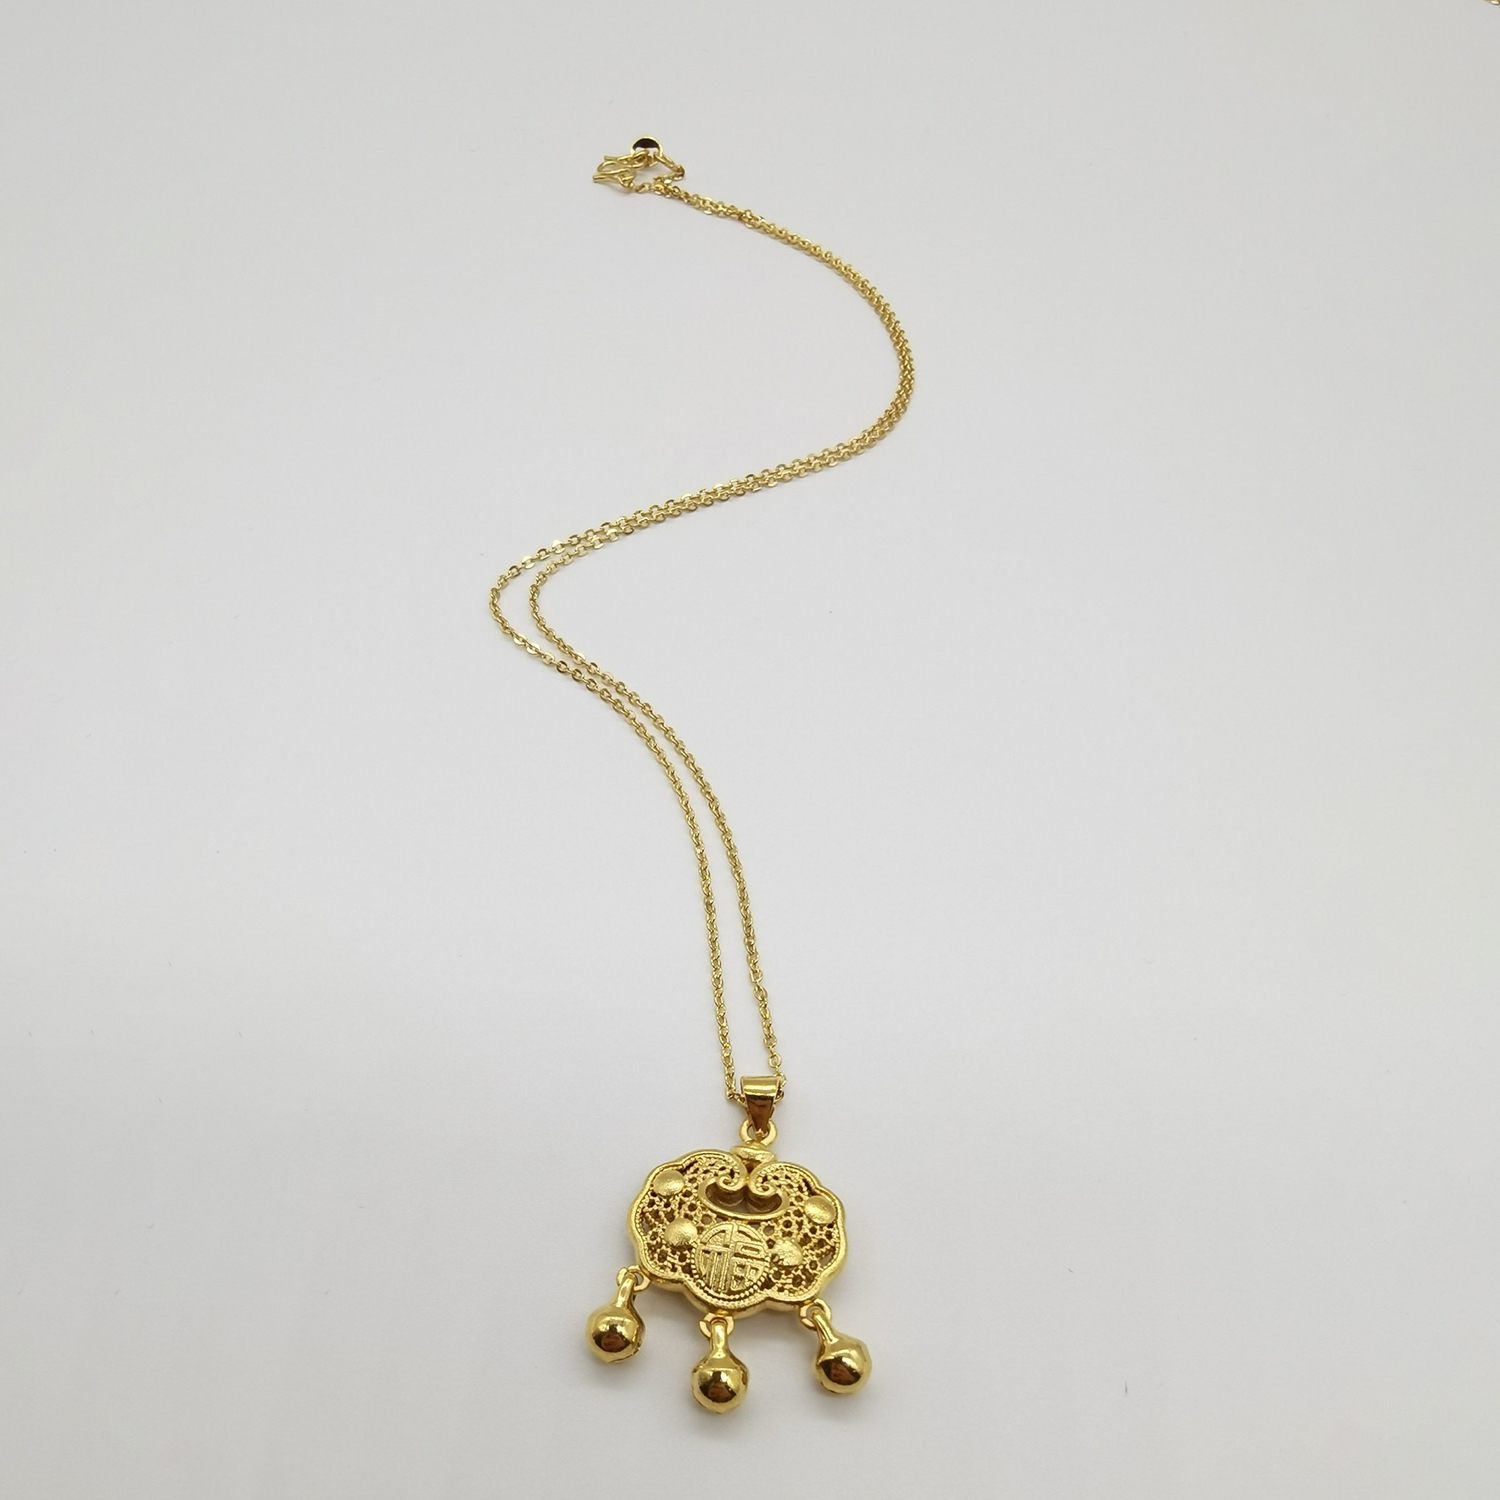 Alluvial gold ancient method vacuum electroplating 24K gold hollow peace lock necklace with blessing character